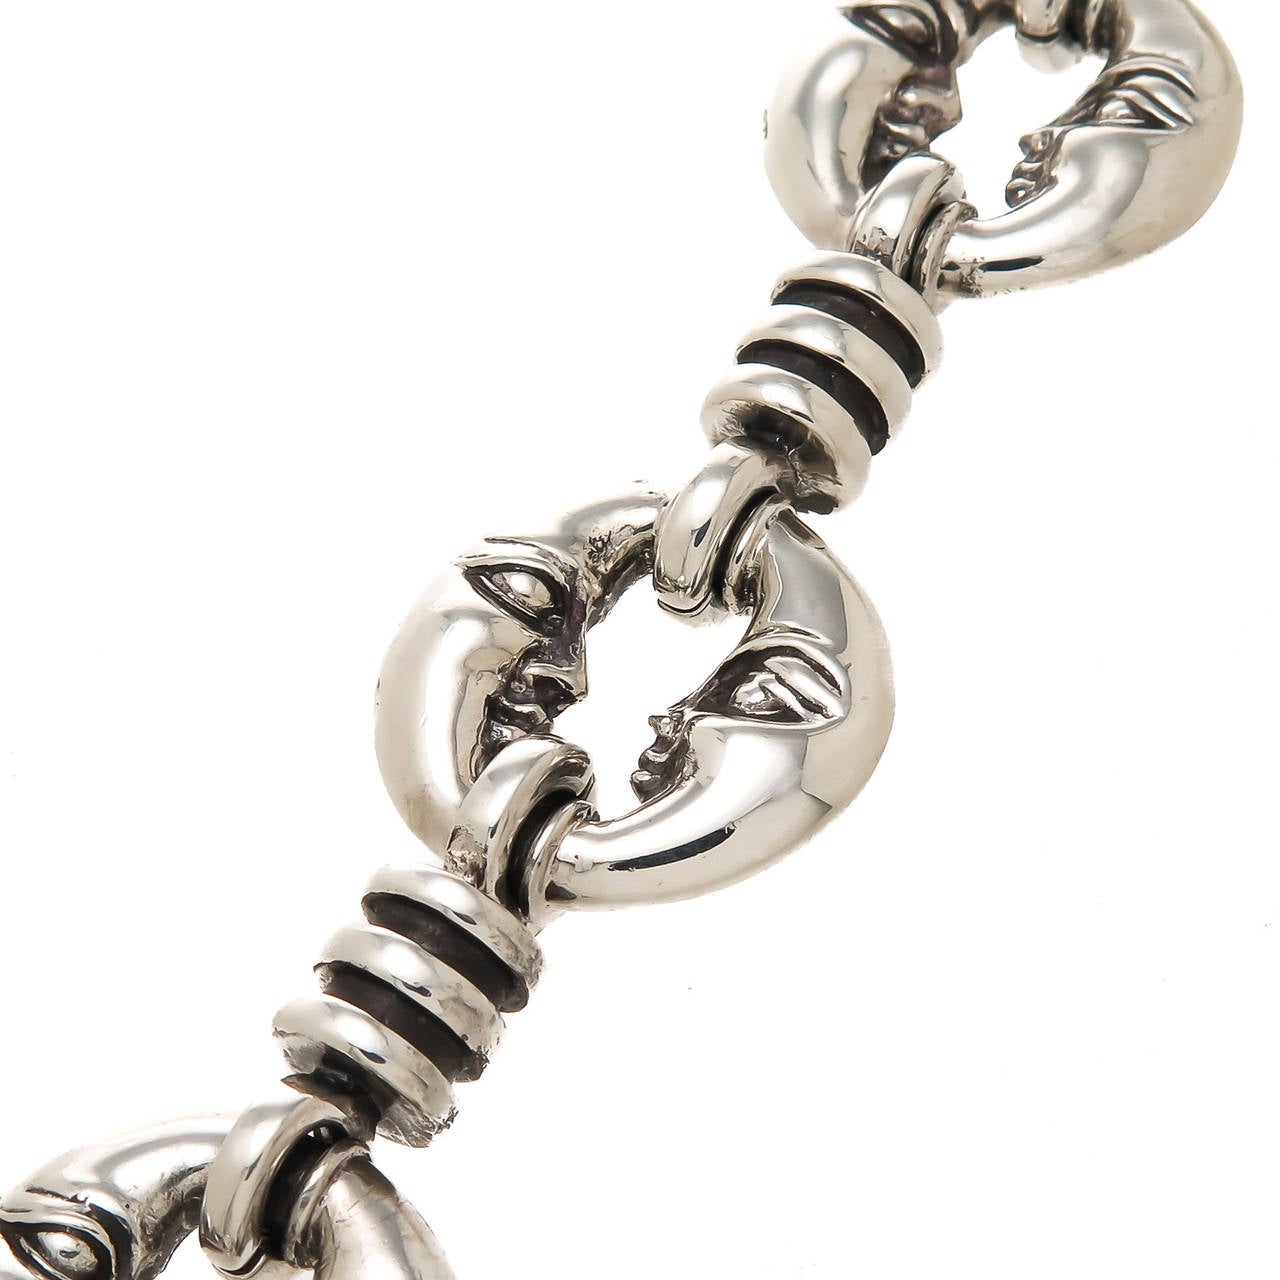 Circa 1990s sterling silver Man in the Moon bracelet by Barry Kieselstein-Cord, having good weight and being very detailed in one of Kieselstein-Cord's iconic themes, having a toggle clasp.